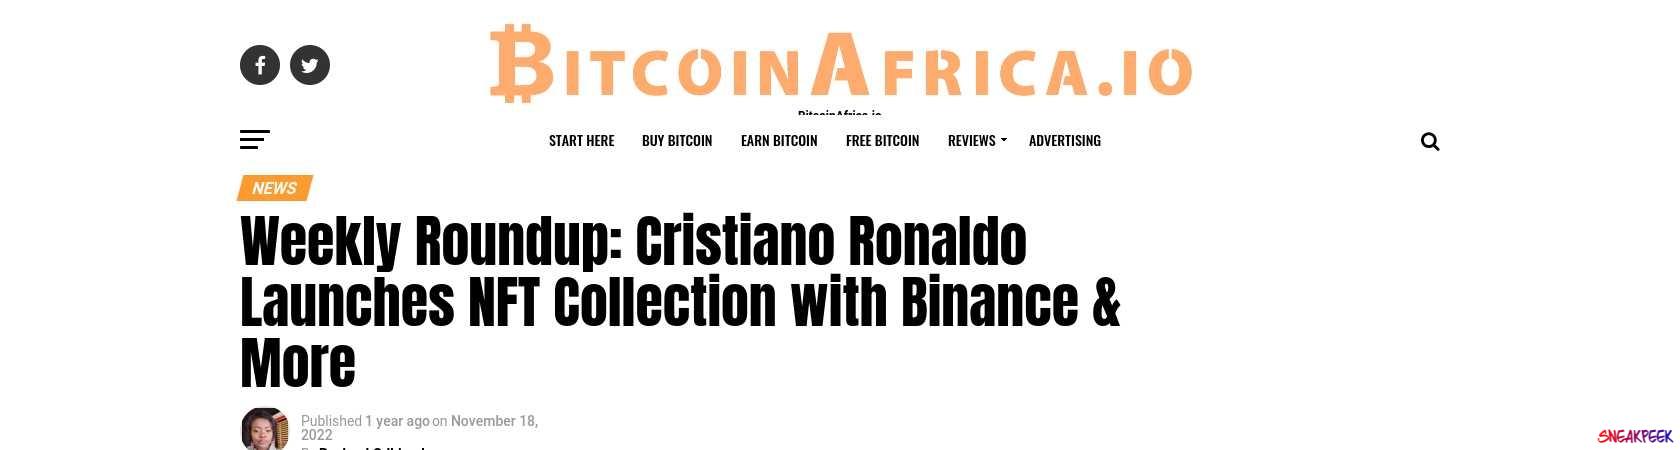 Read the full Article:  ⭲ Weekly Roundup: Cristiano Ronaldo Launches NFT Collection with Binance & More